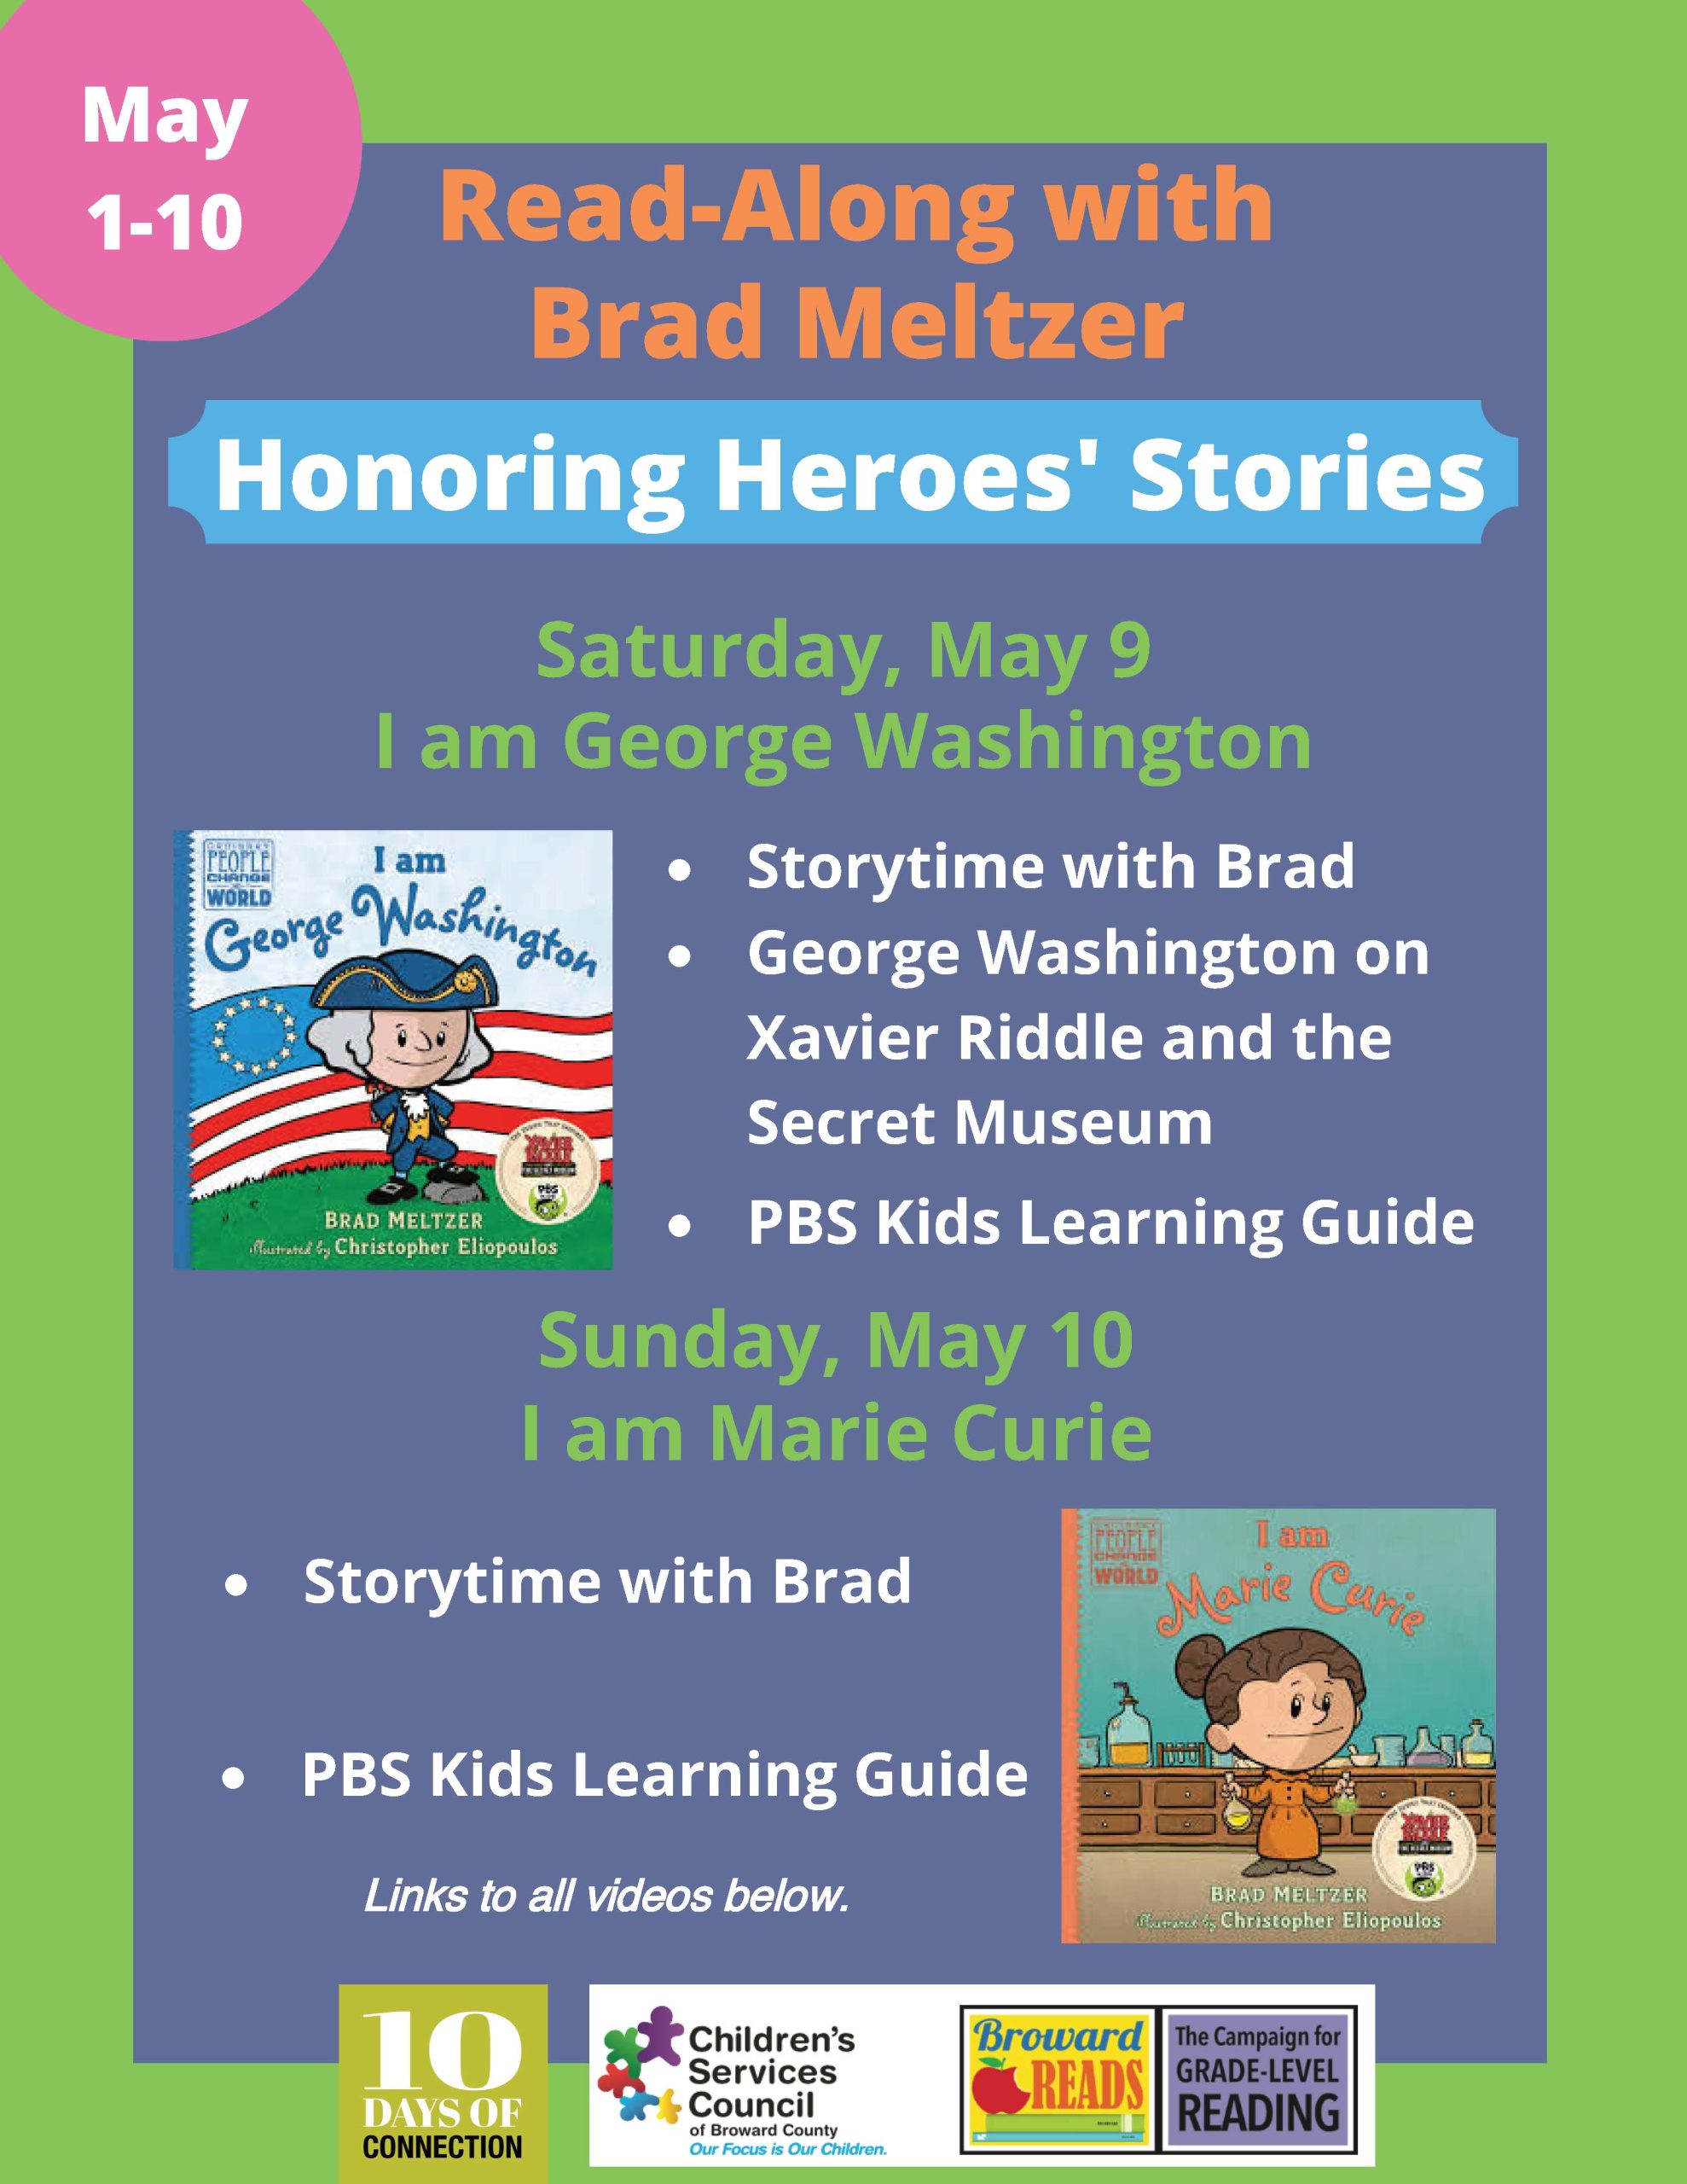 read along with brad meltzer image seven